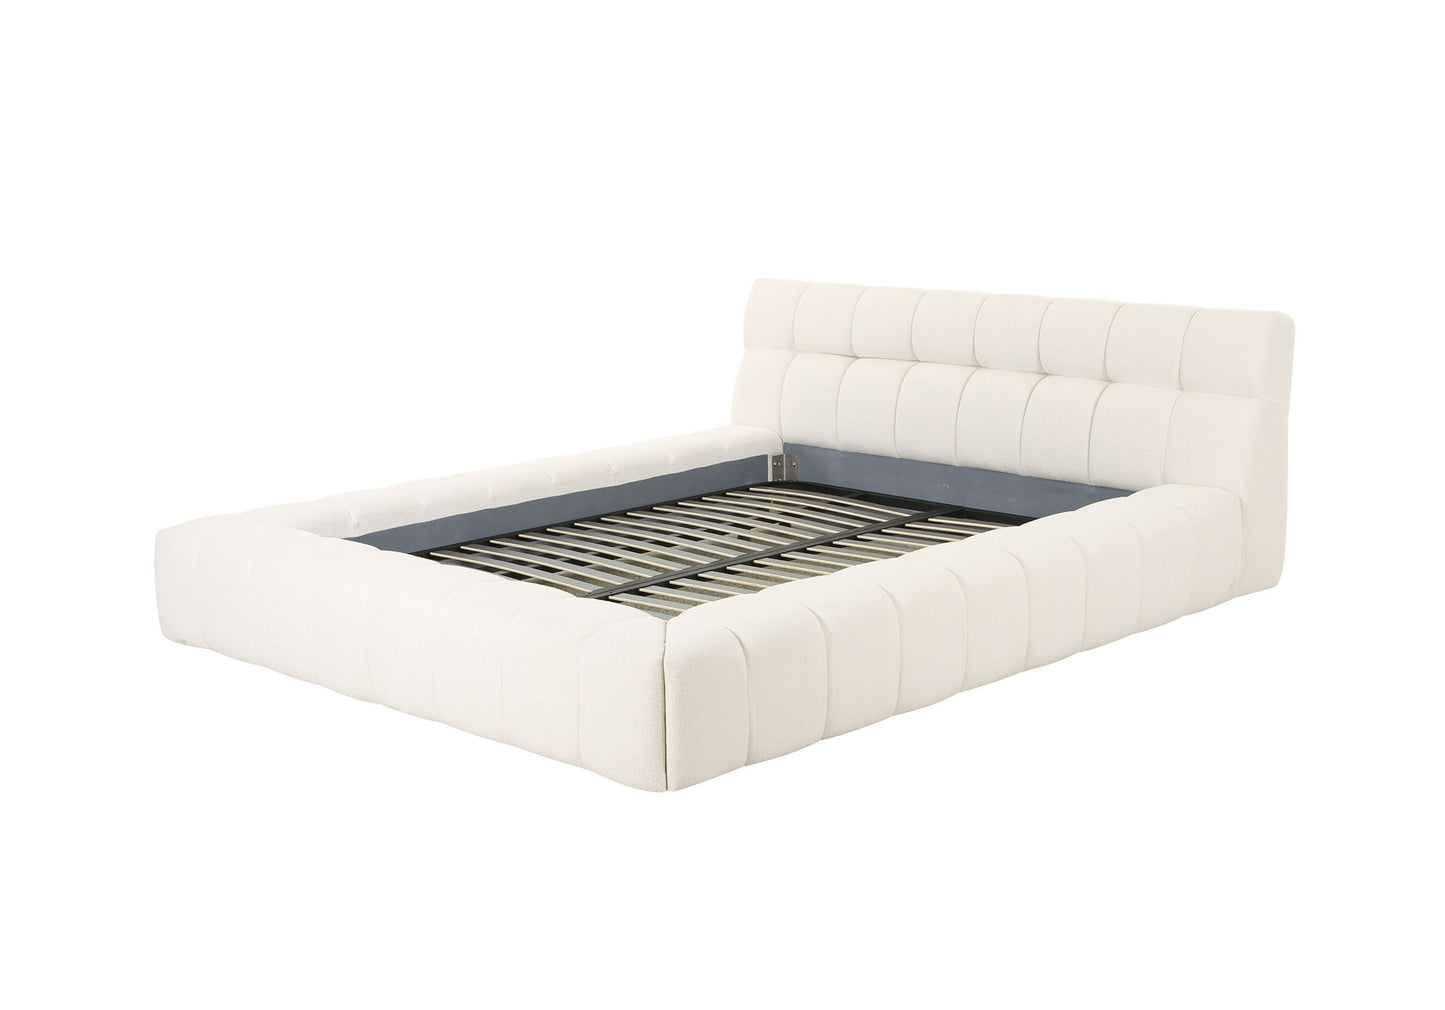 Divani Casa Tyree - Modern Tufted Off-White Fabric Bed